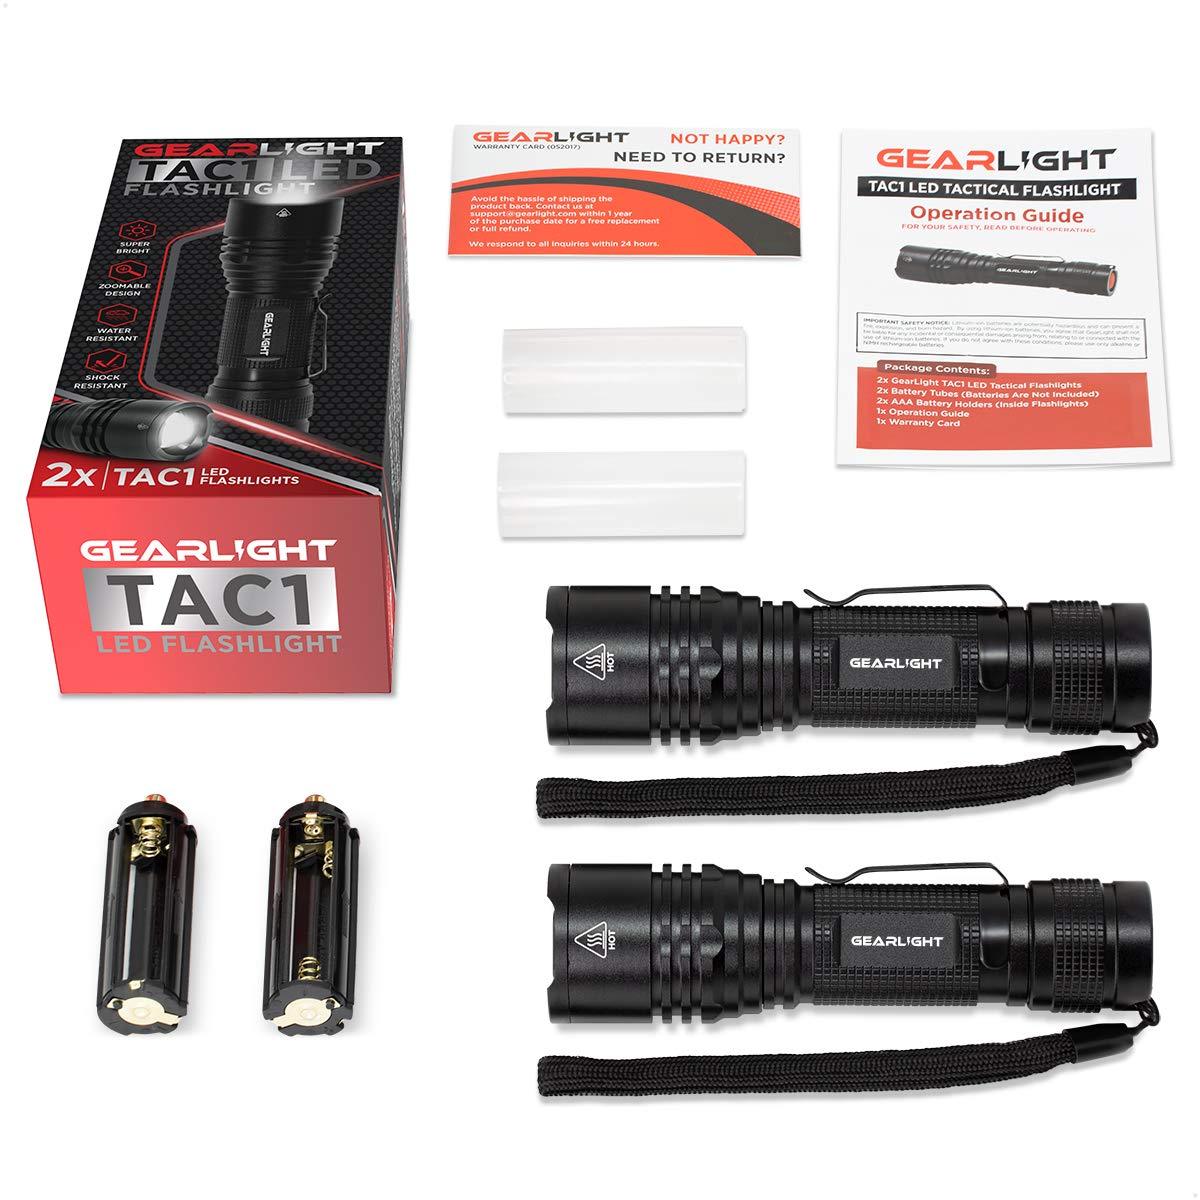 GearLight TAC LED Tactical Flashlight [2 PACK] - Single Mode, High Lumen, Zoomable, Water Resistant, Flash Light - Camping, Outdoor, Emergency, Everyday Flashlights with Clip - image 2 of 7